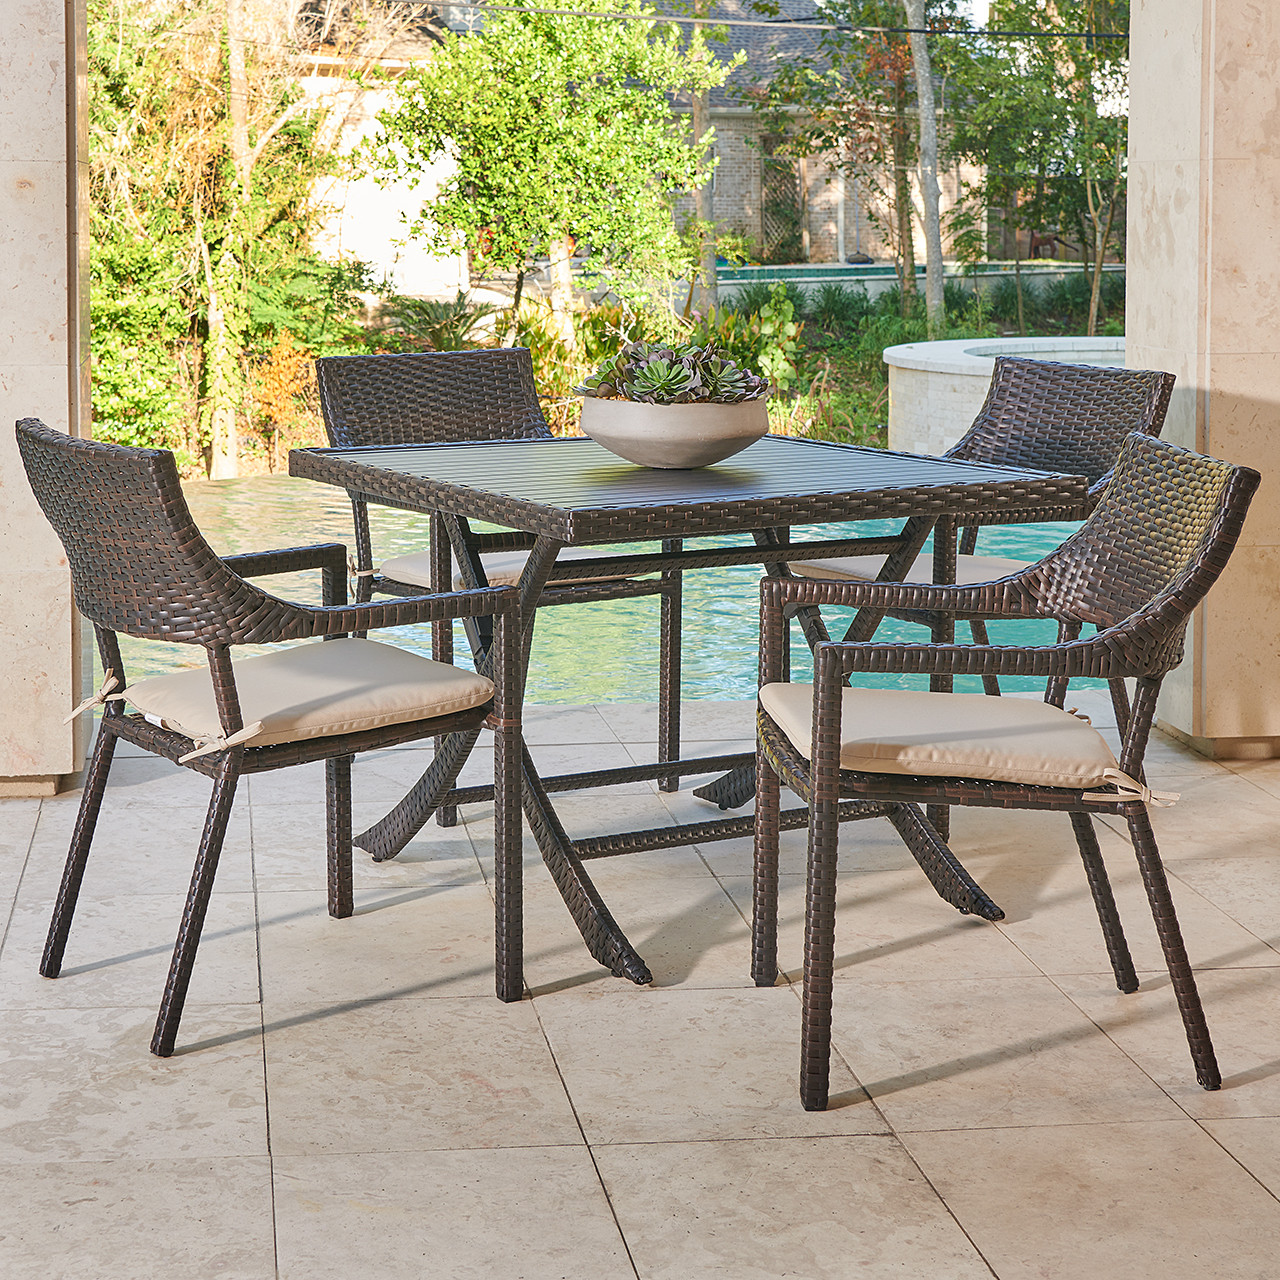 Terrace Dark Elm Outdoor Wicker with Cushions 5 Piece Dining Set + 42 in. Sq. Table